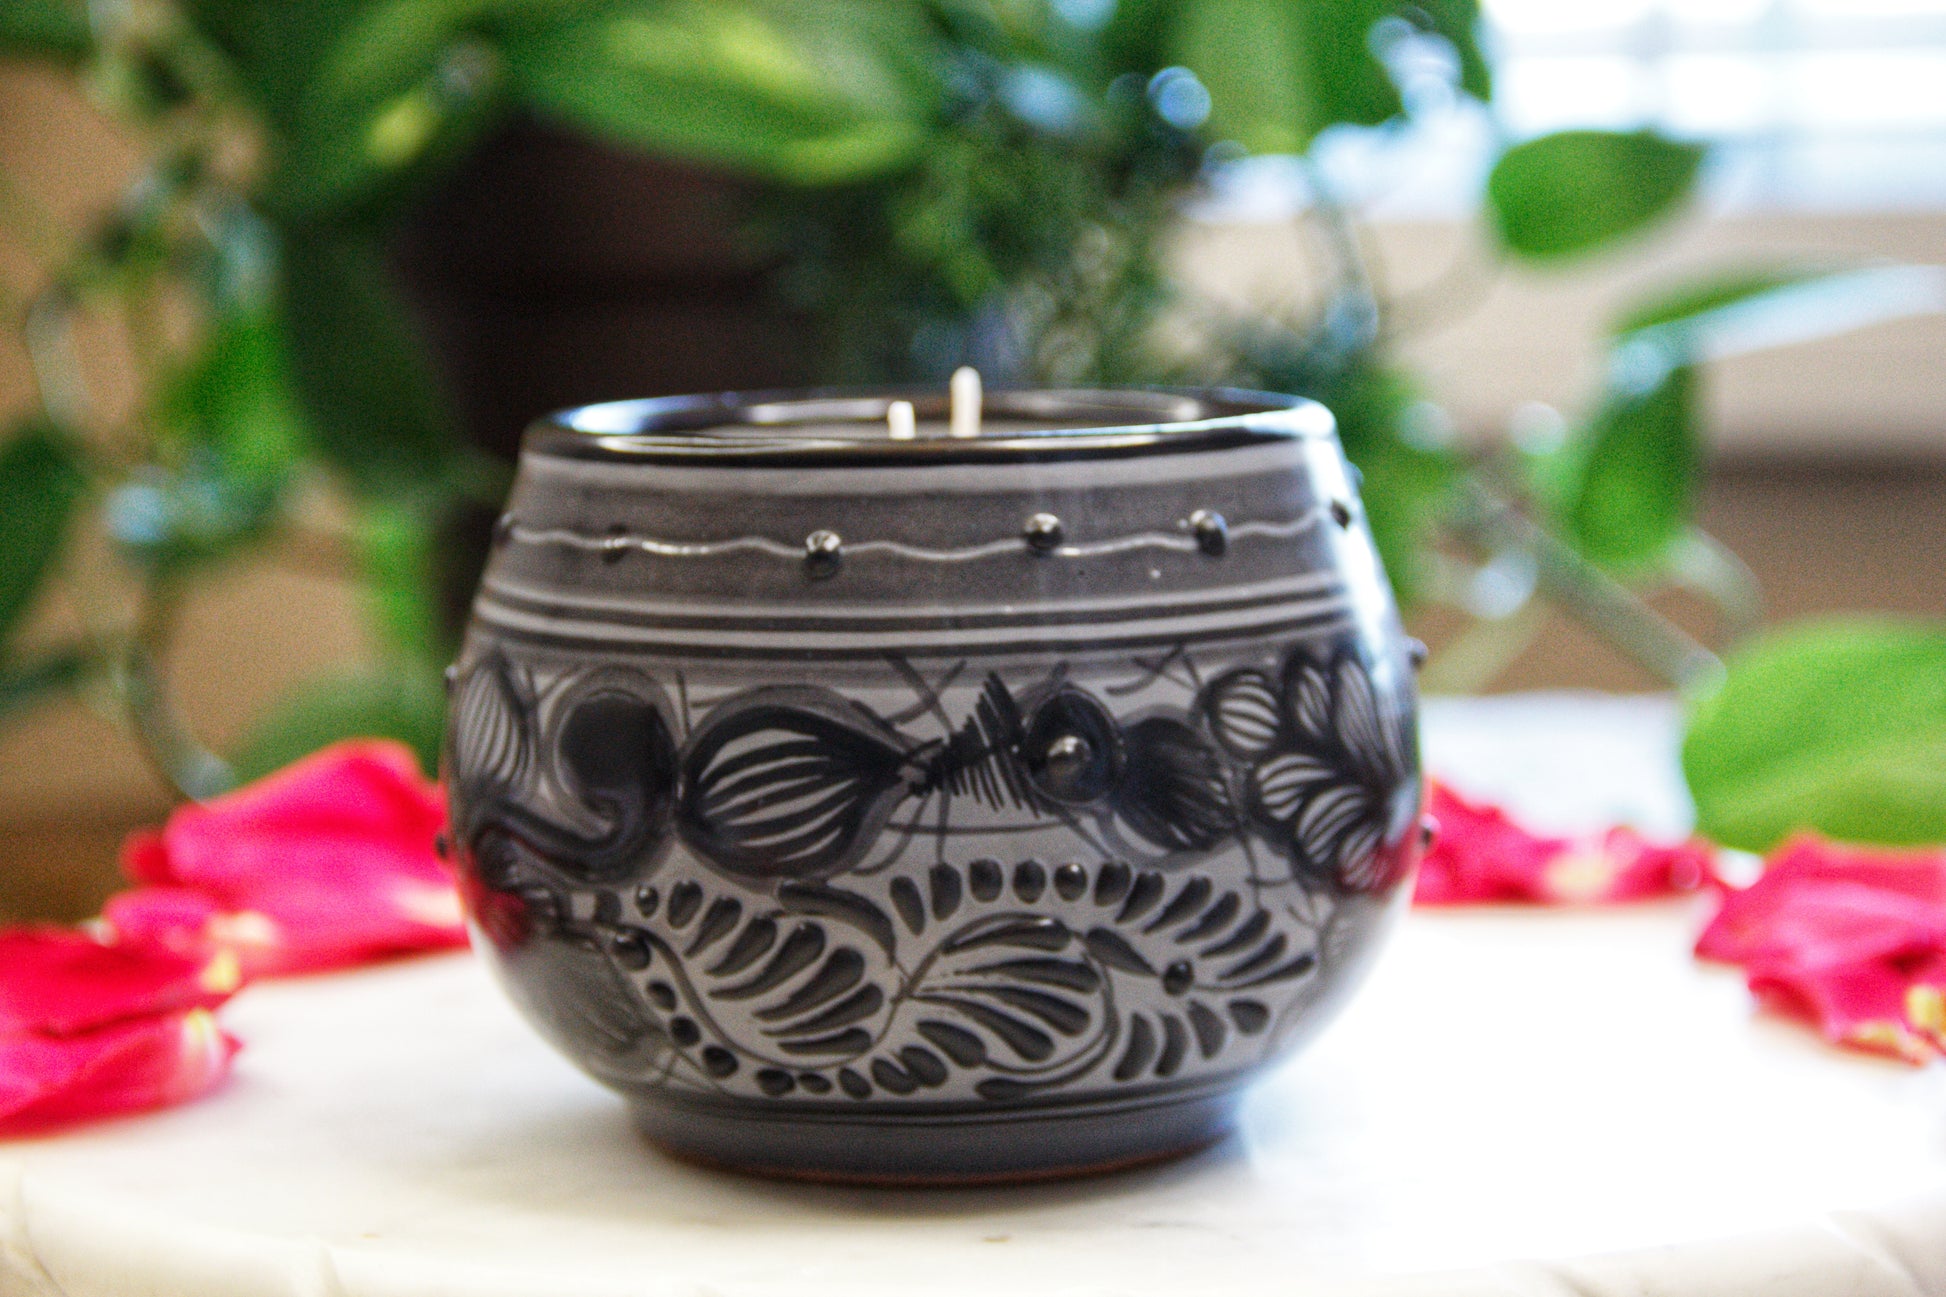 side view of an Artisanal candle in a beautiful black and grey handmade flower design talavera cup with handle. Handcrafted by Artisan in Puebla, Mexico. 100% All Natural Soy Candle. Reuse the talavera as home decor or storage.